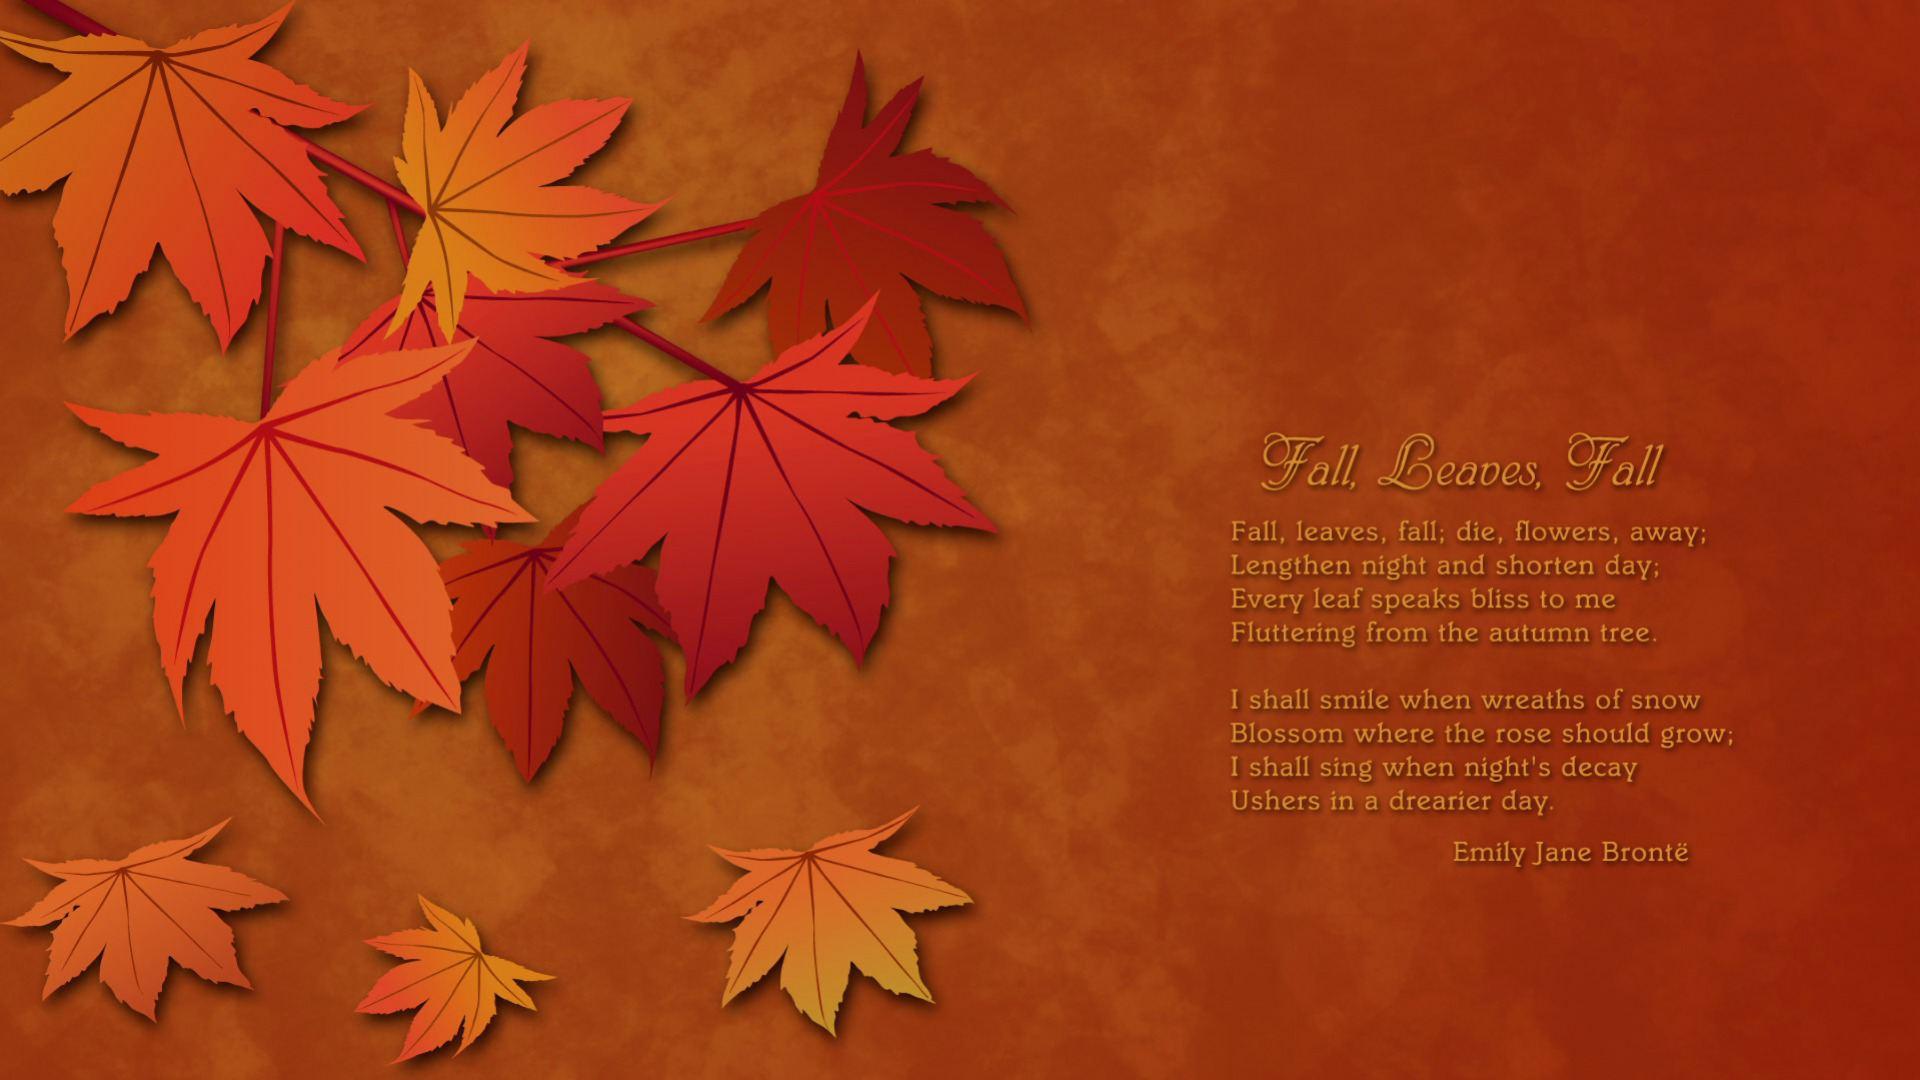 Autumn Wallpaper for Computers, Tablets, or Phones